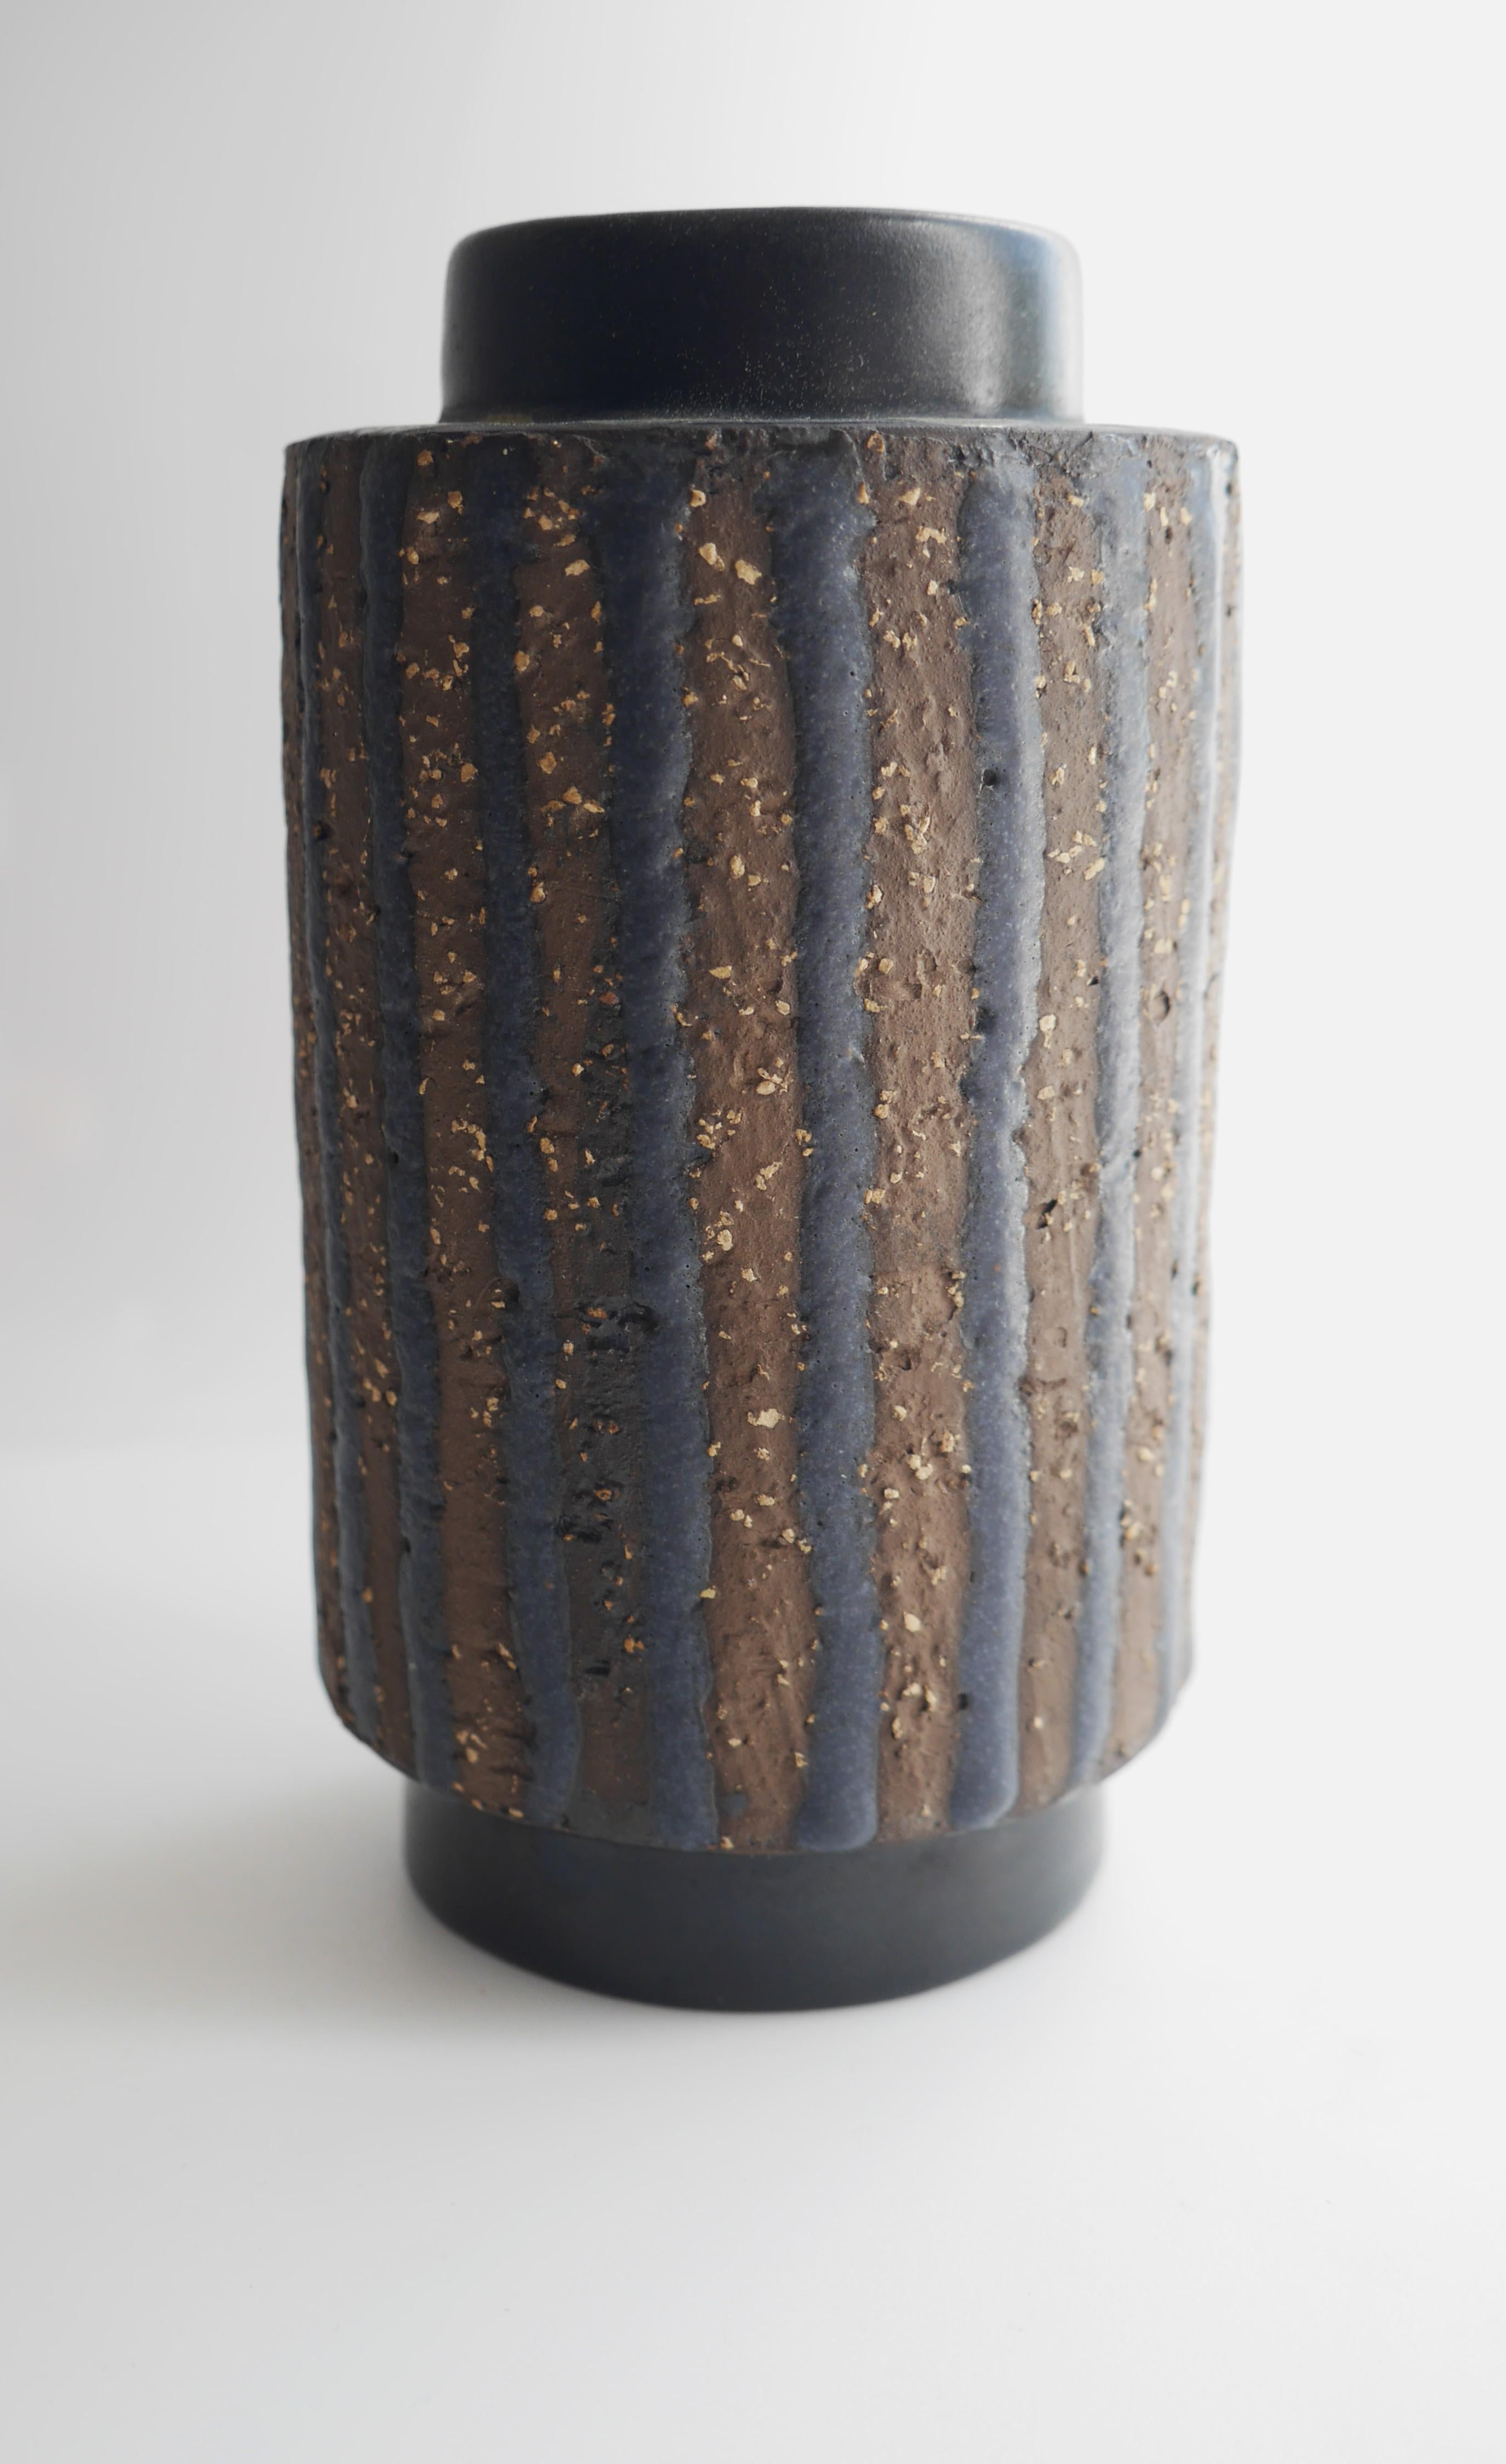 Hand-Crafted 'Ringo' Vase by Mari Simmulson for Upsala Ekeby, Sweden For Sale